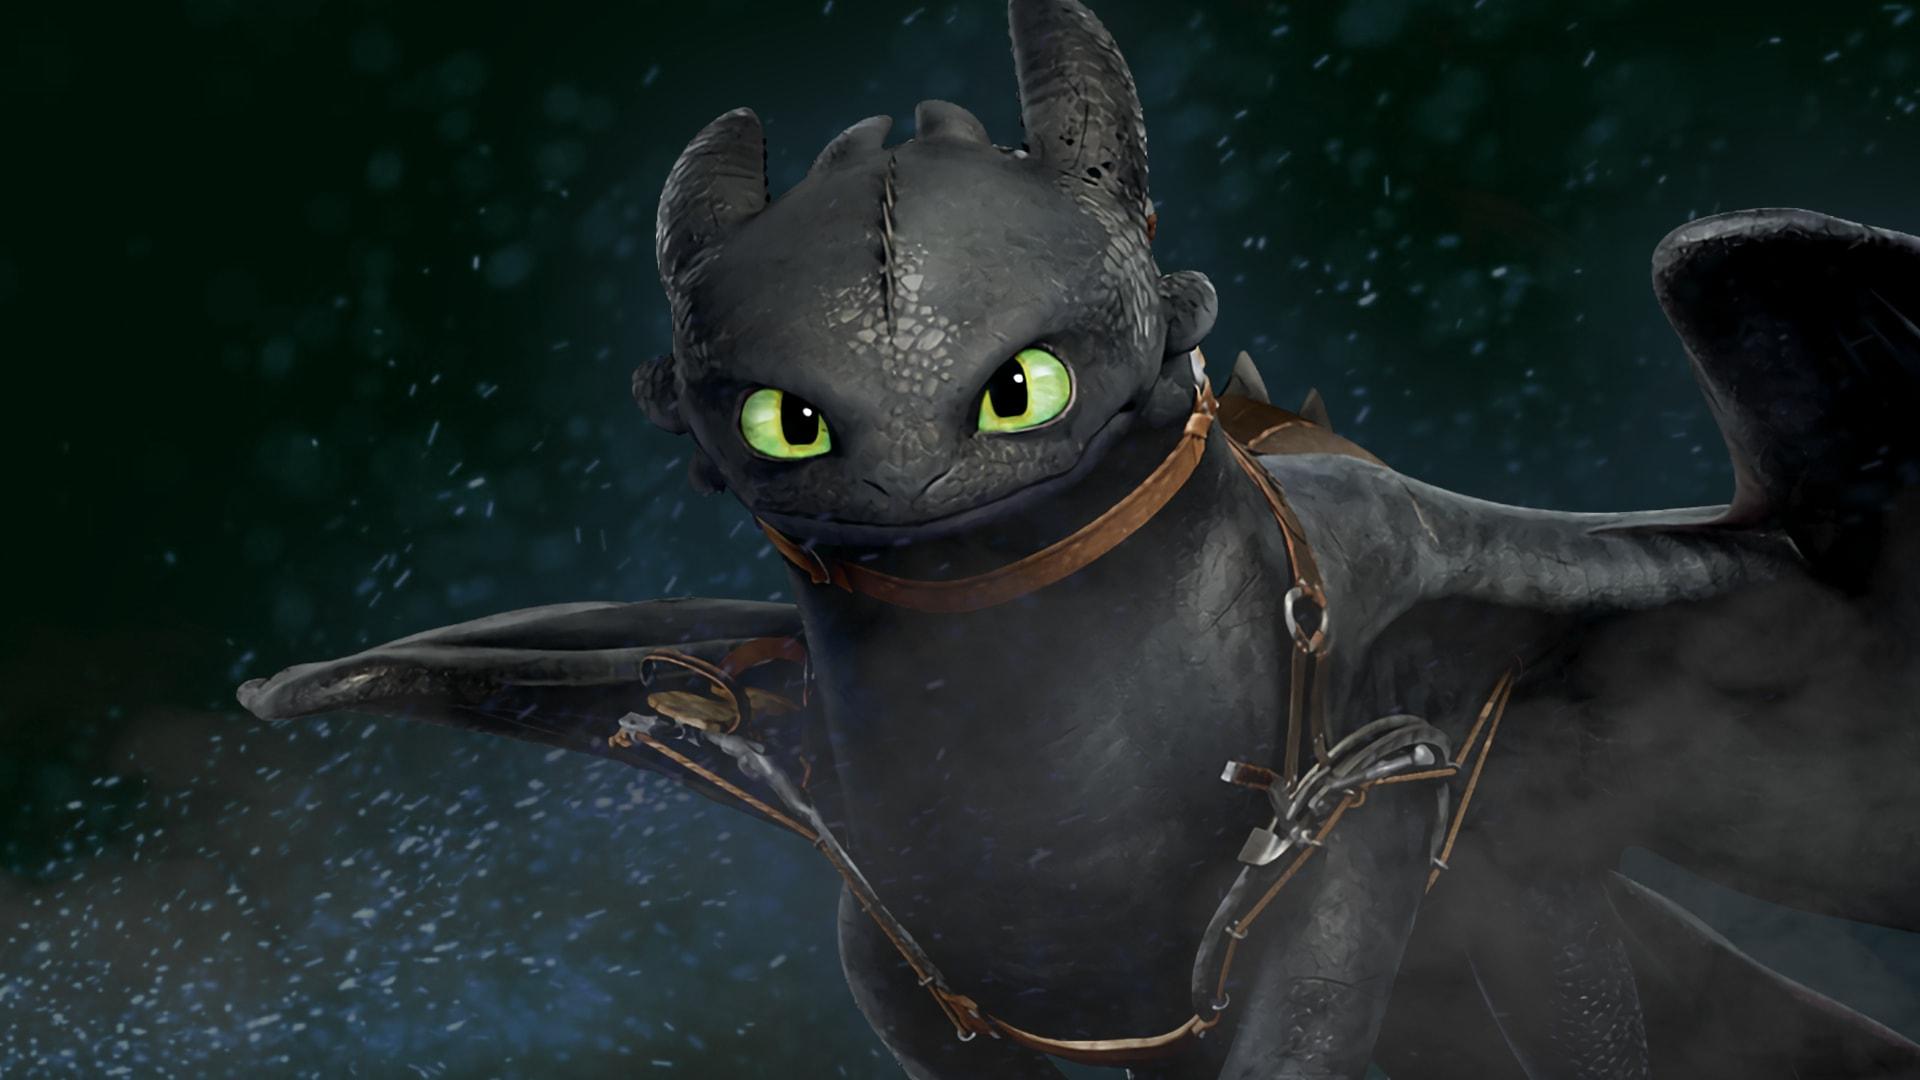 Wallpaper of Toothless, How to Train Your Dragon background